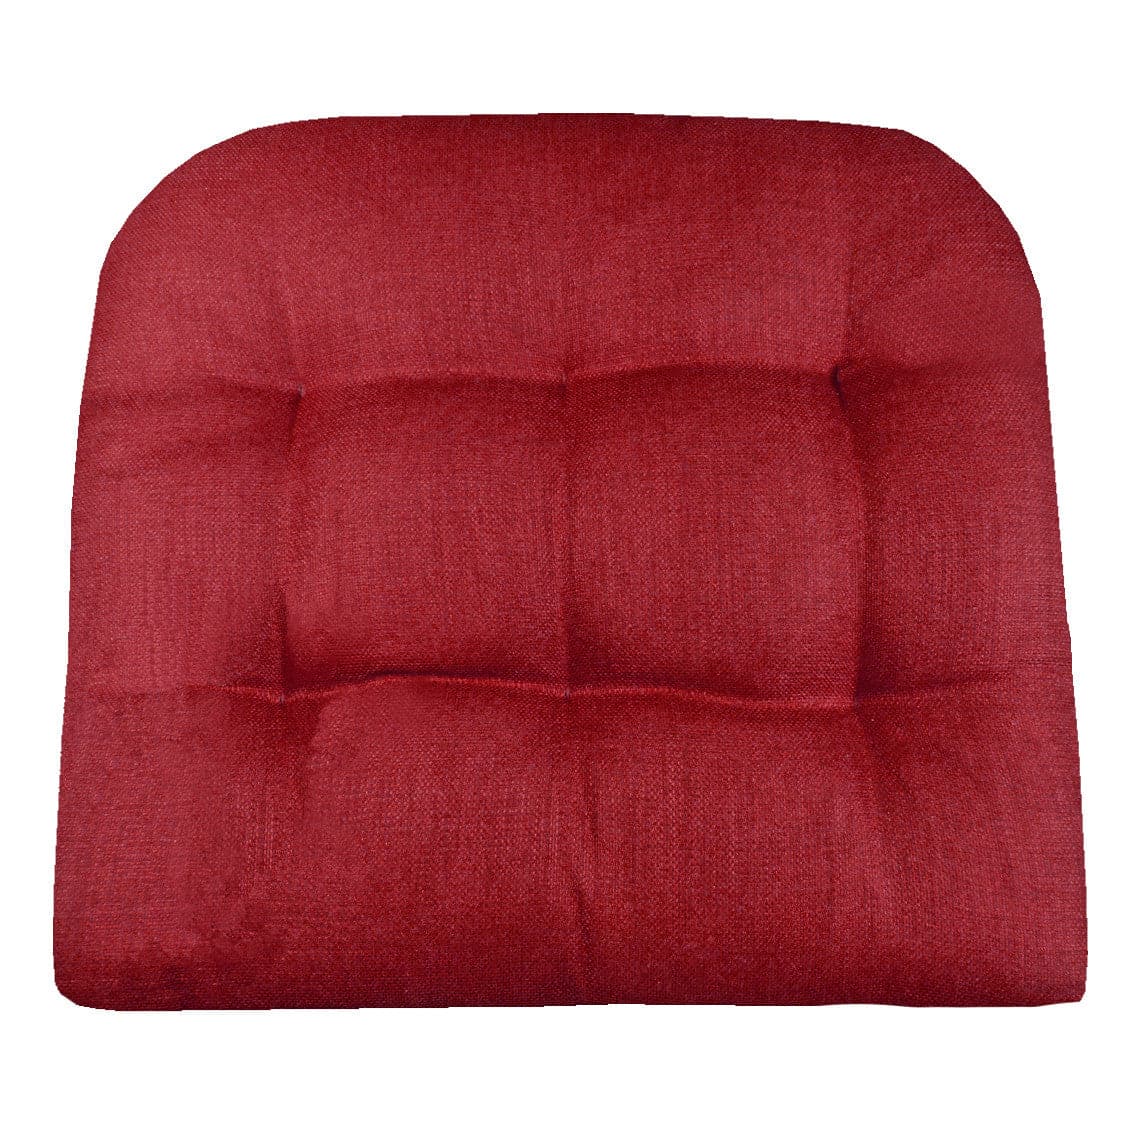 Rave Red Indoor / Outdoor Dining Chair Cushion - Barnett Home Decor - Red